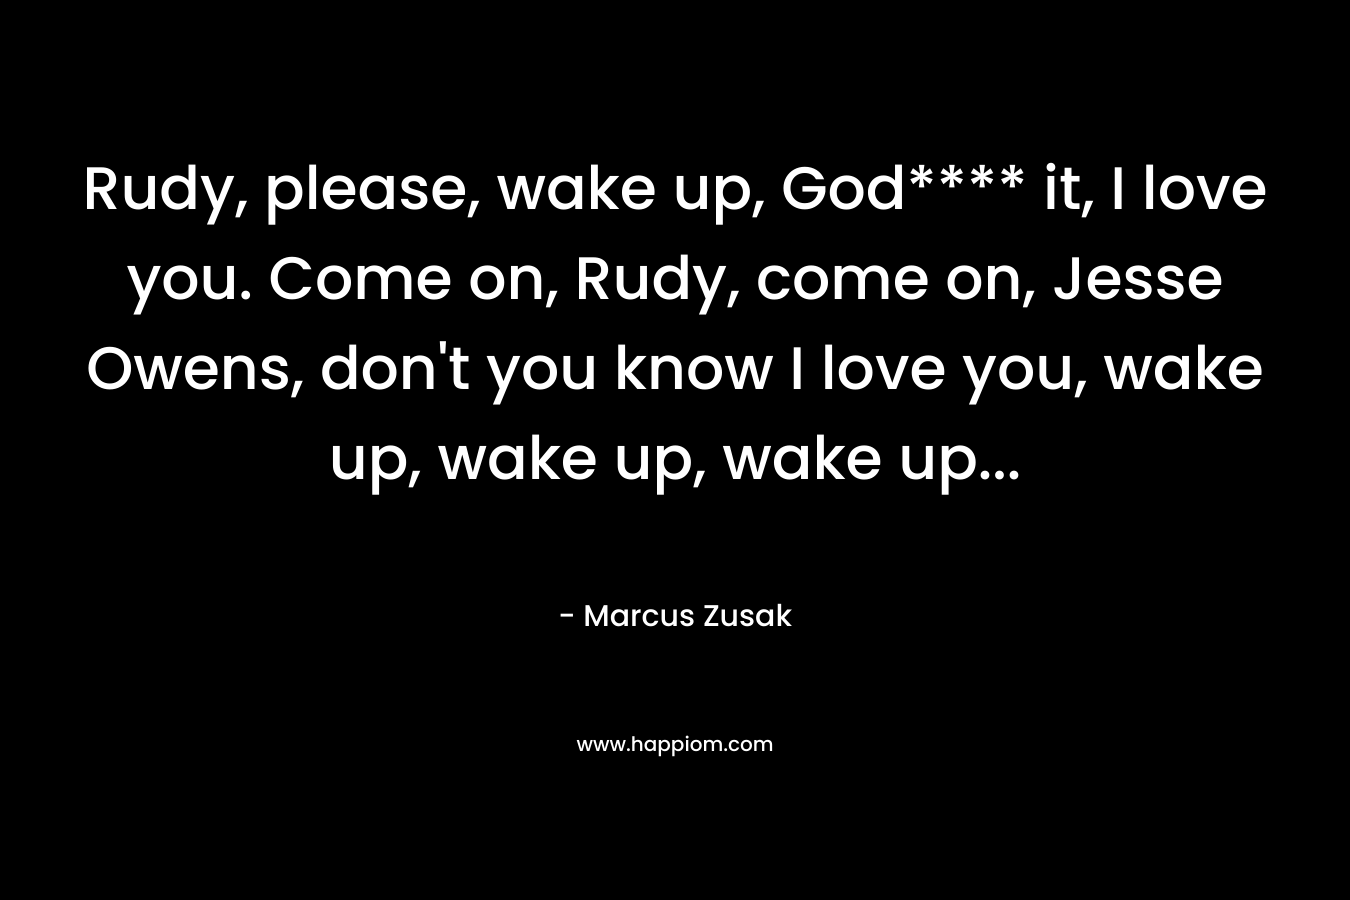 Rudy, please, wake up, God**** it, I love you. Come on, Rudy, come on, Jesse Owens, don’t you know I love you, wake up, wake up, wake up… – Marcus Zusak